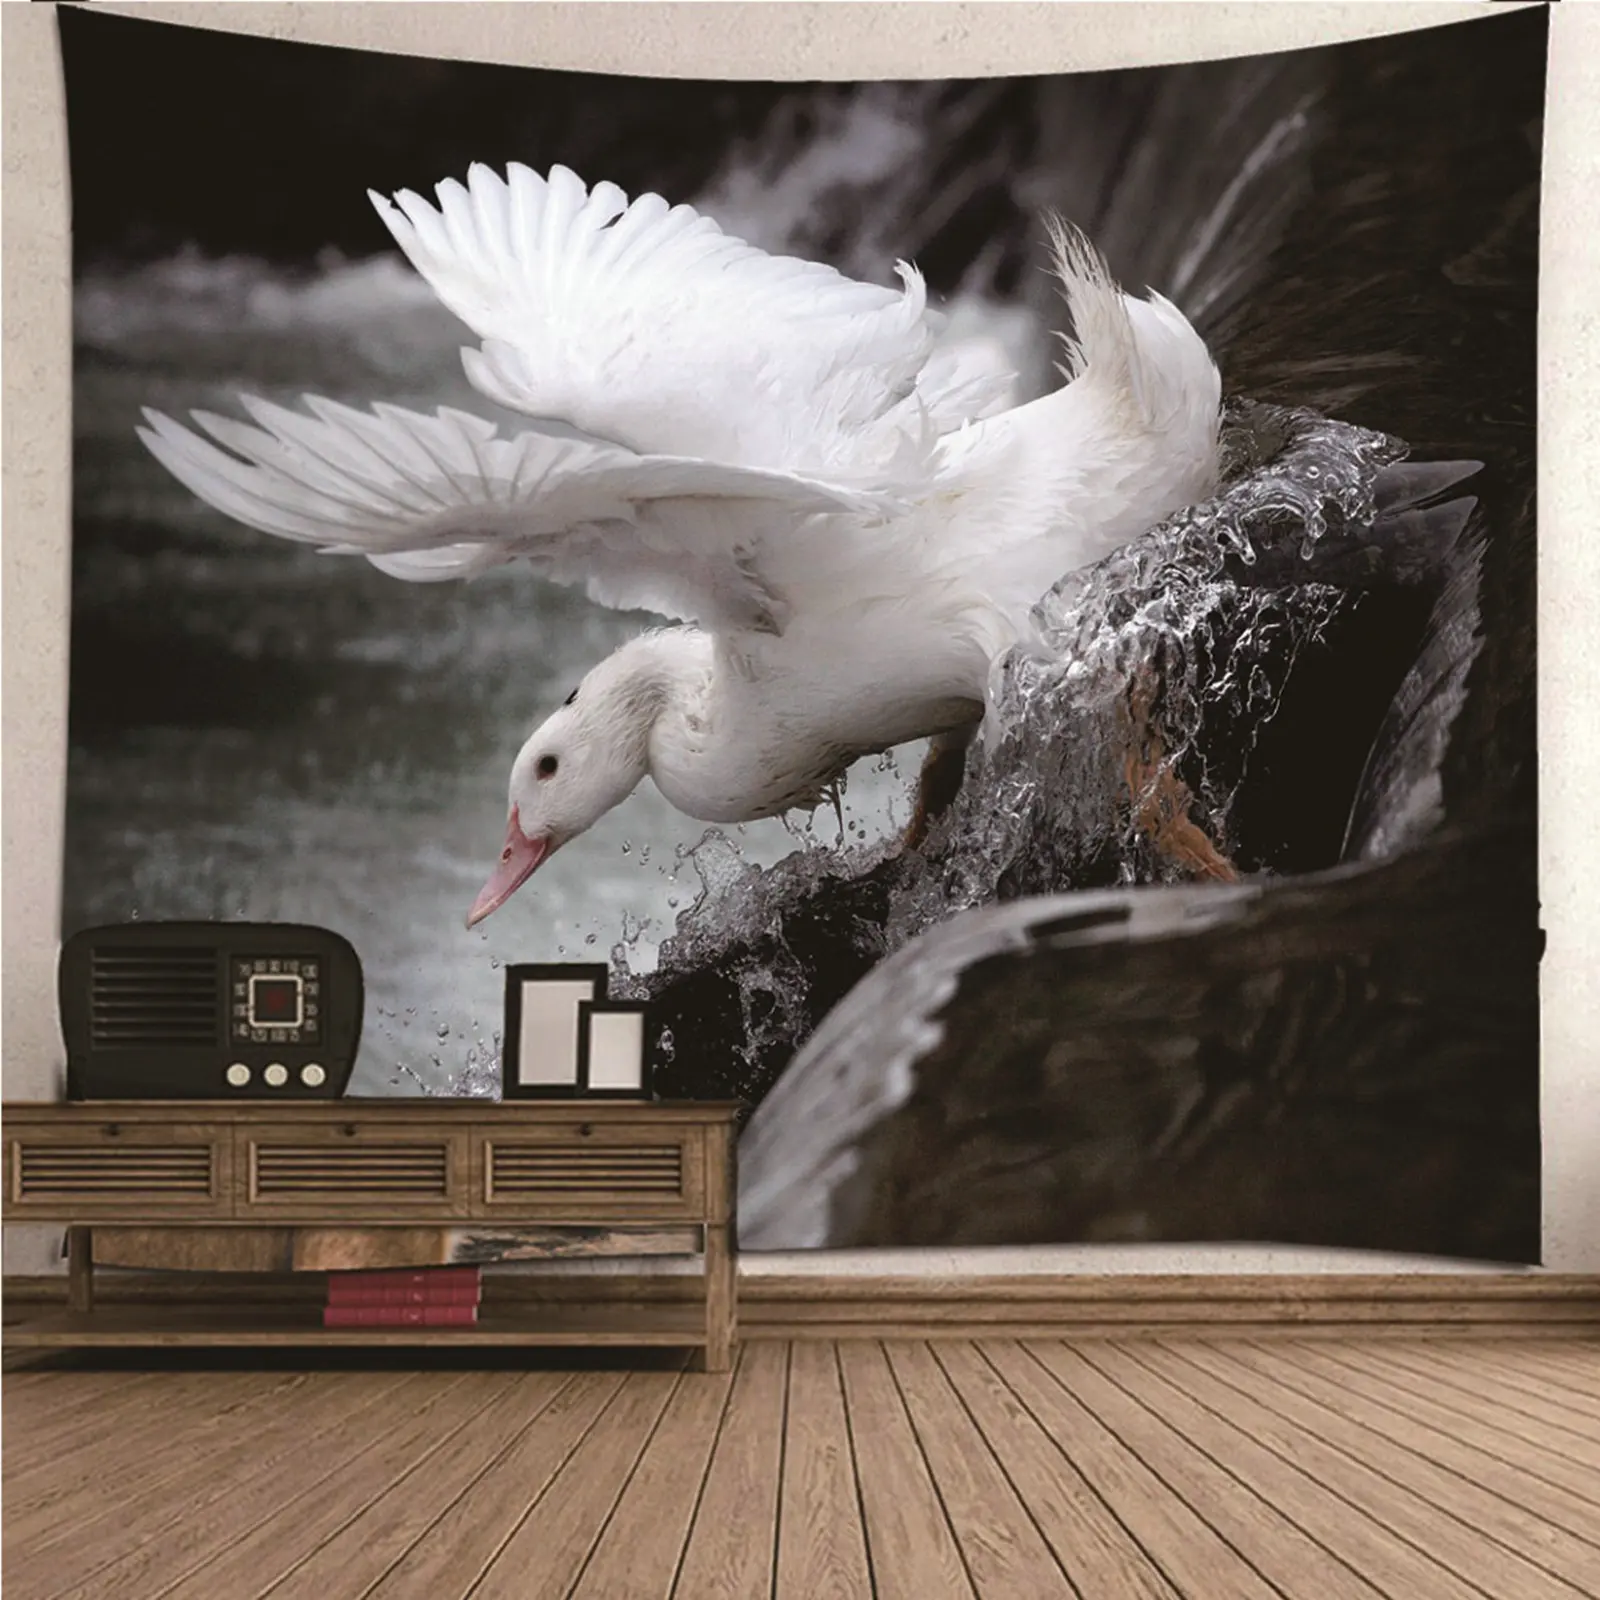 

Tapestry For Wall Wall Rugs Tapestries Nature animal Flying Bird Play Water Wall Hanging Blanket Dorm Art Decor Covering